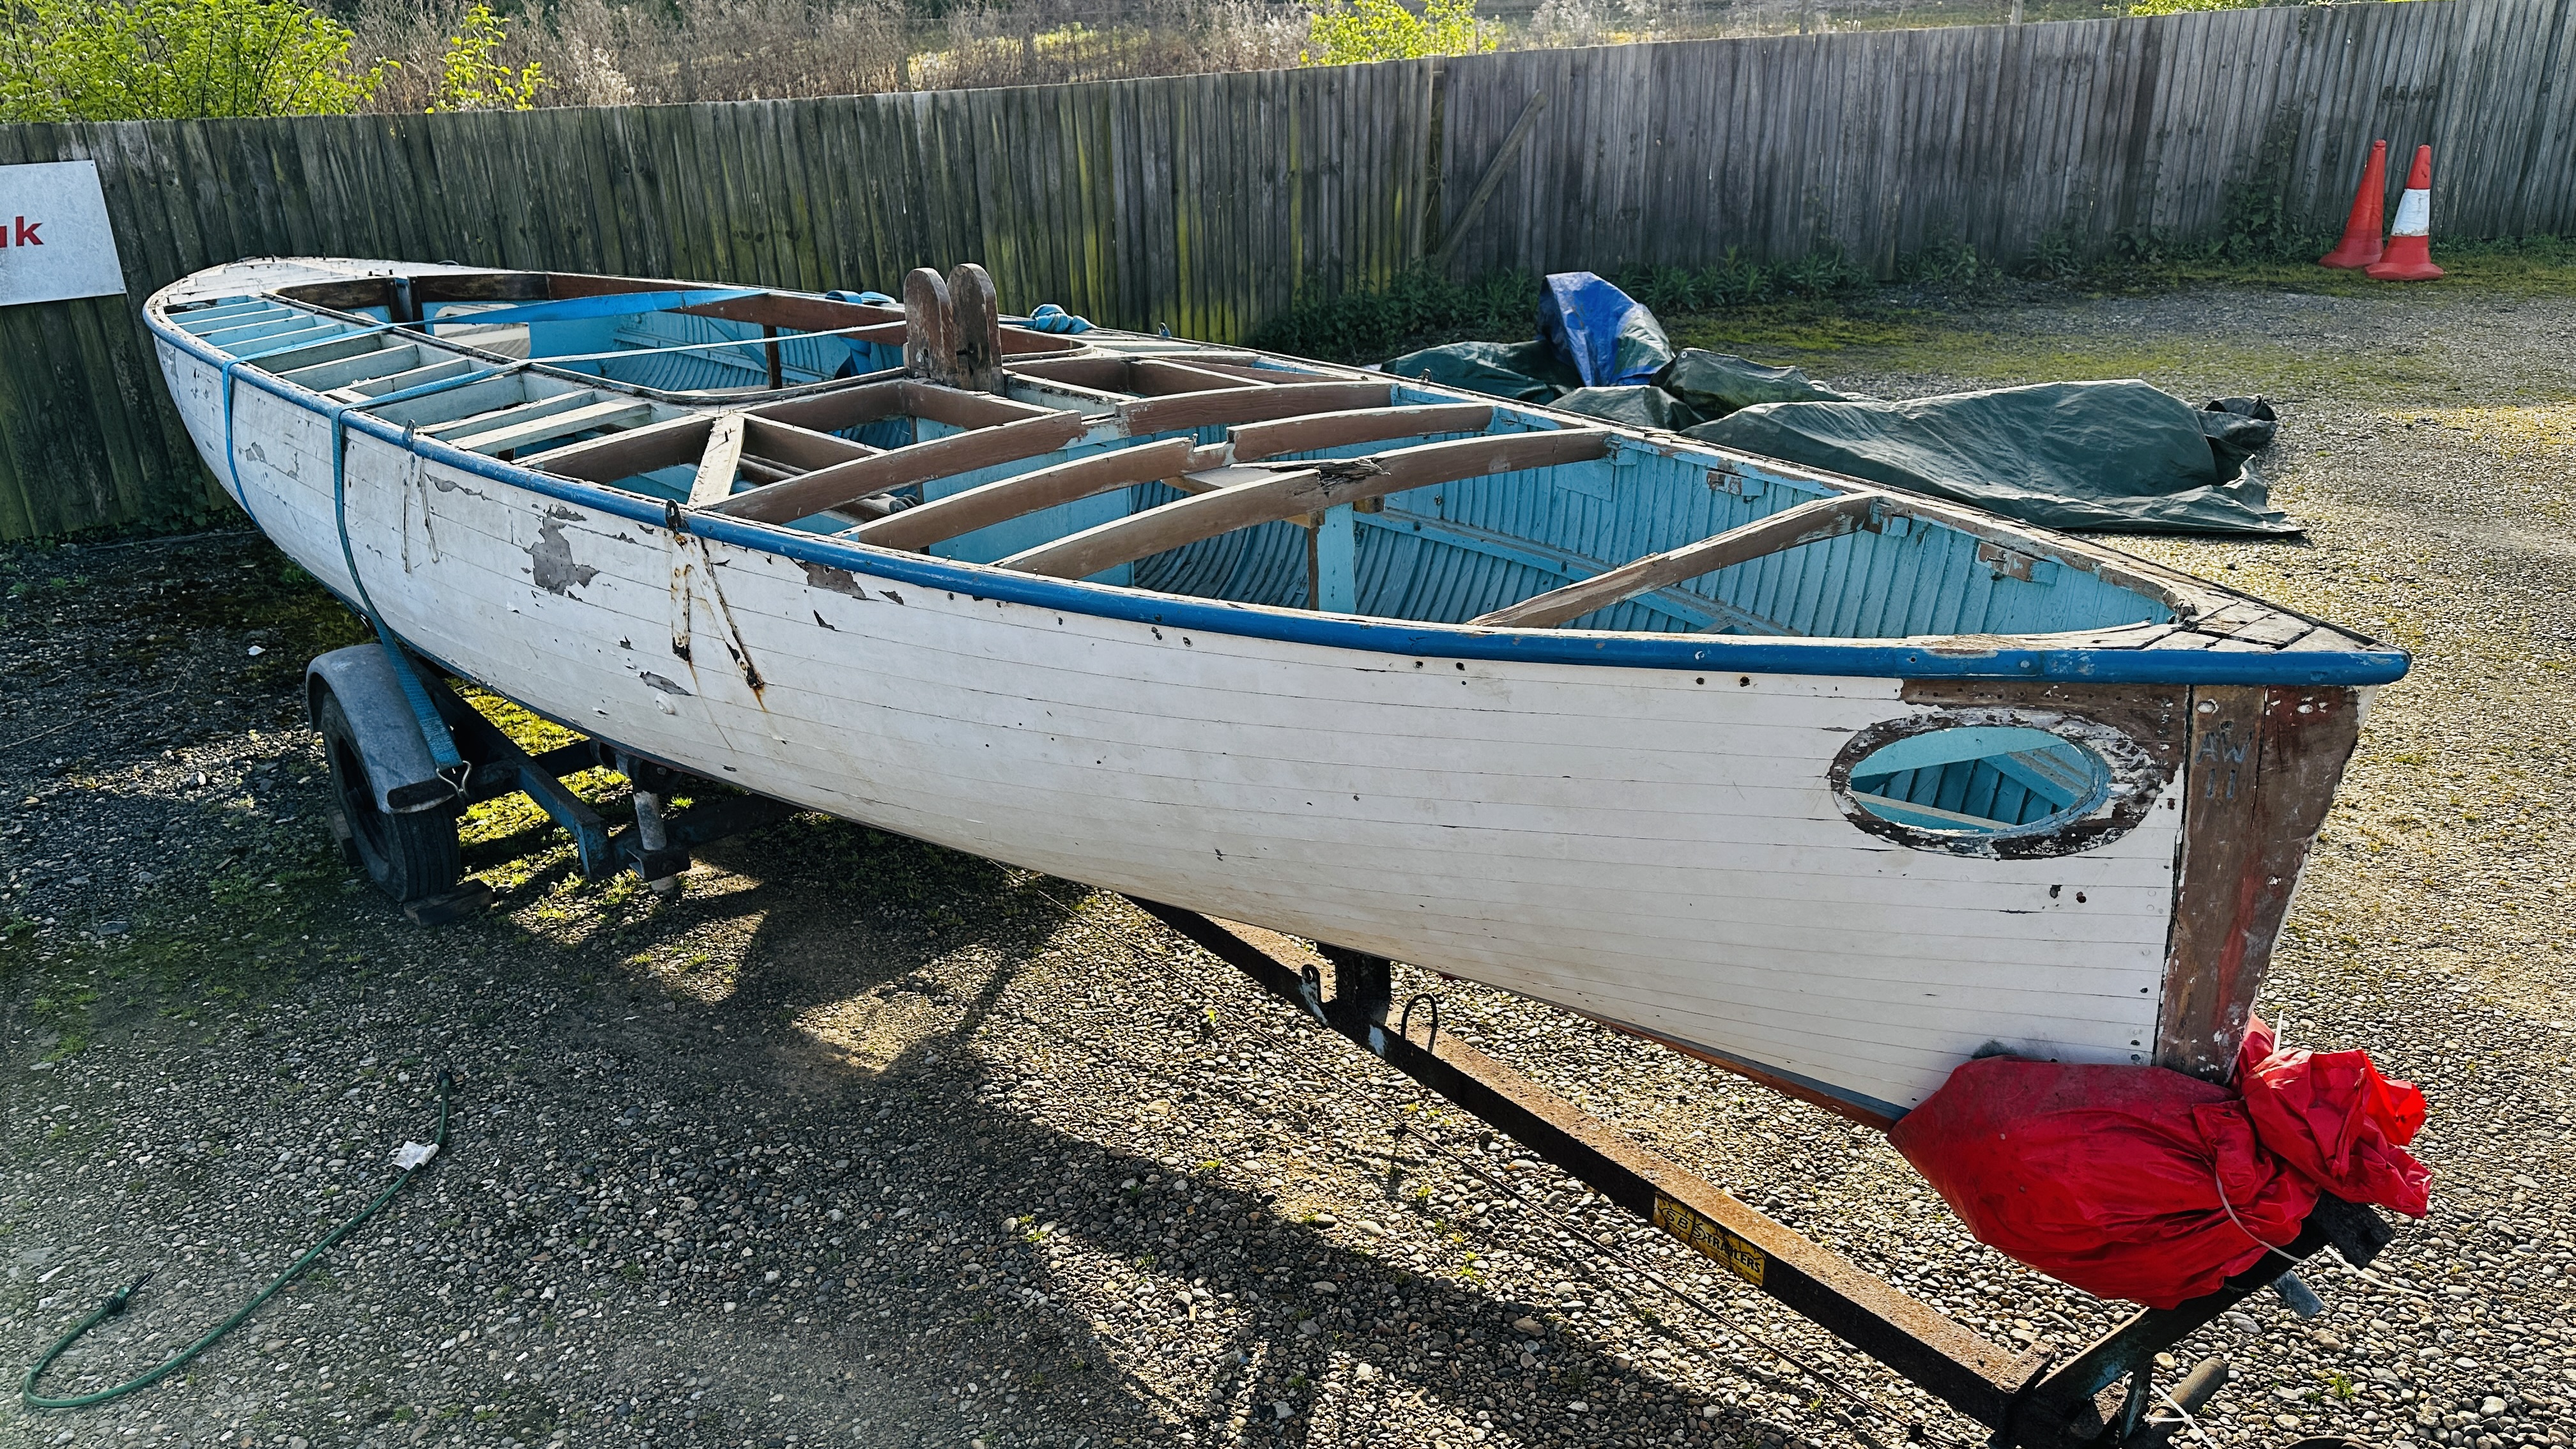 A WW2 UFFA FOX RESCUE BOAT BELIEVED TO BE BUILT BY TAYLOR WOODROW, STAMPED AW11, 1 OF 402 MADE,